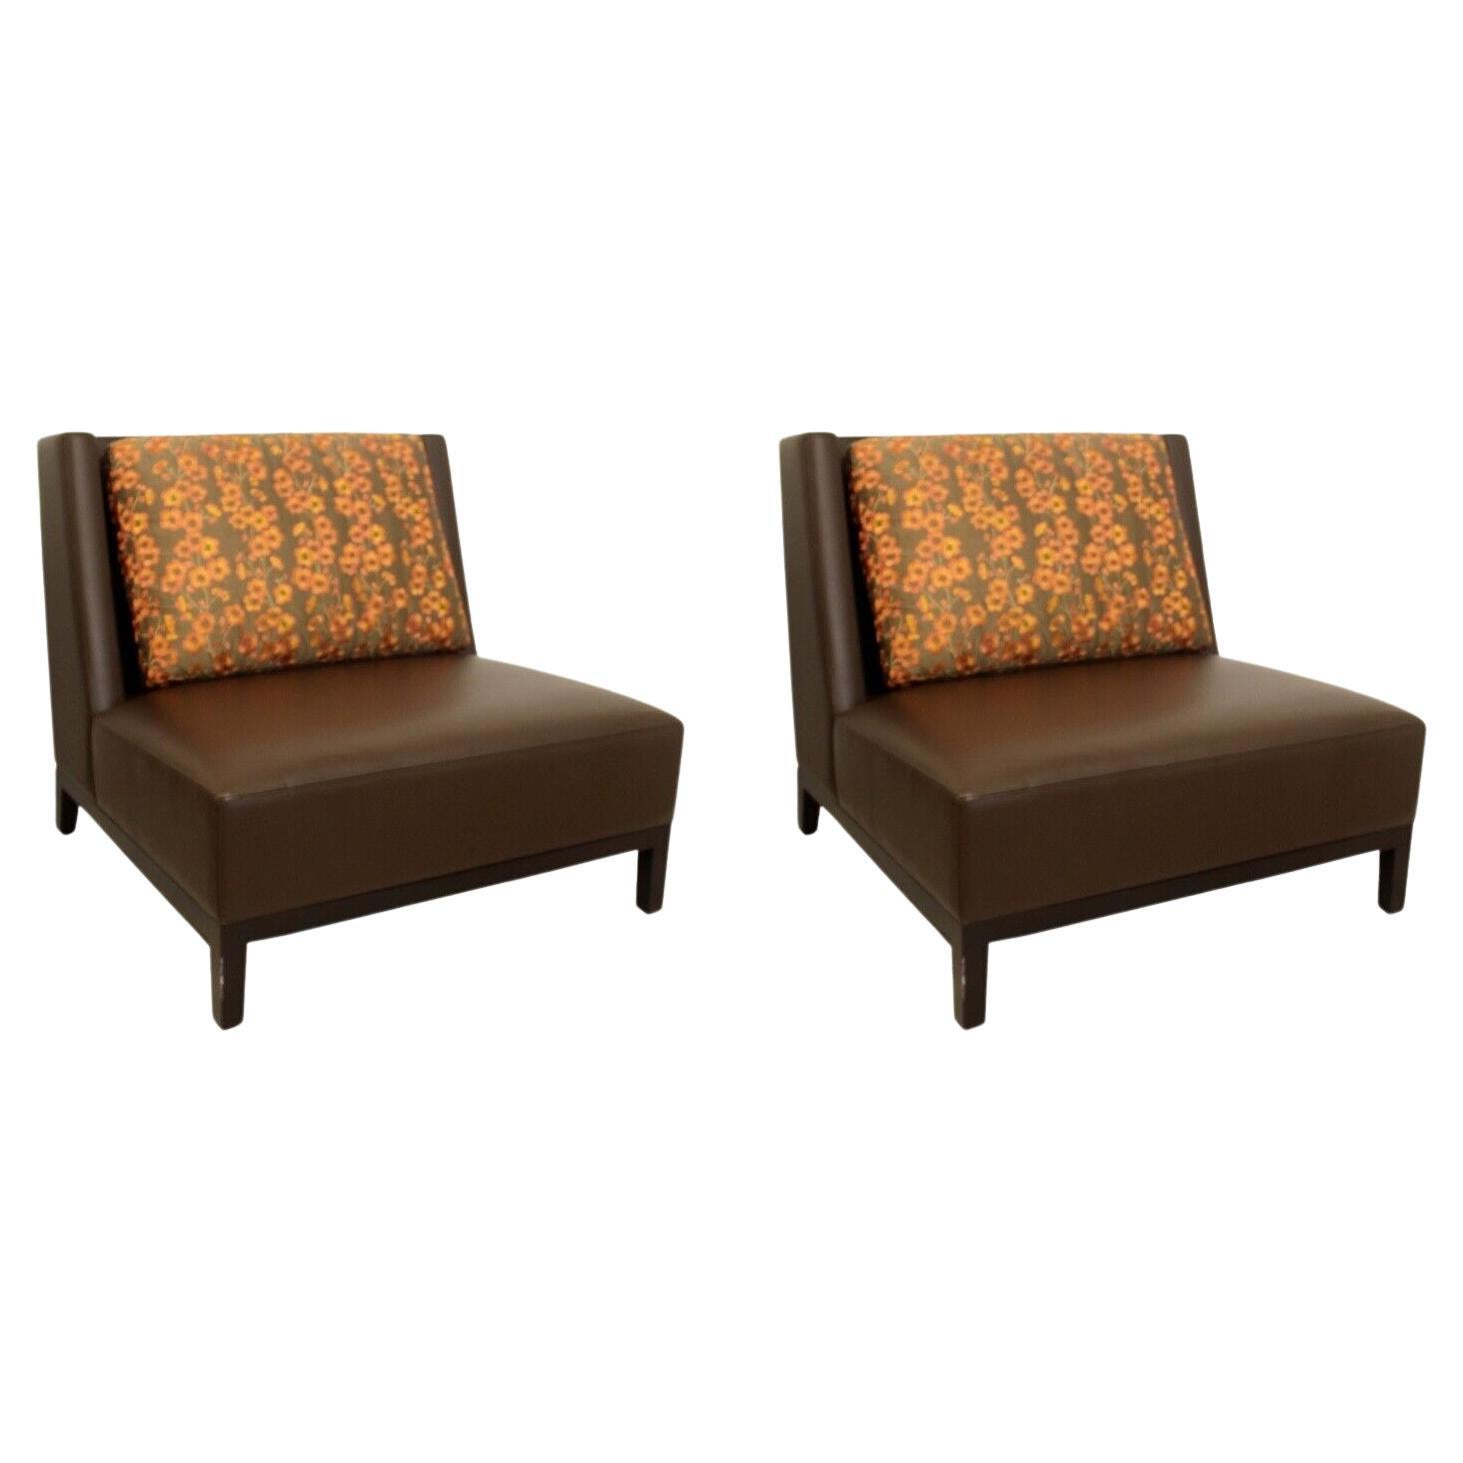 Pair of Christian Leather Latin Slipper Chairs in Pollack Fabric